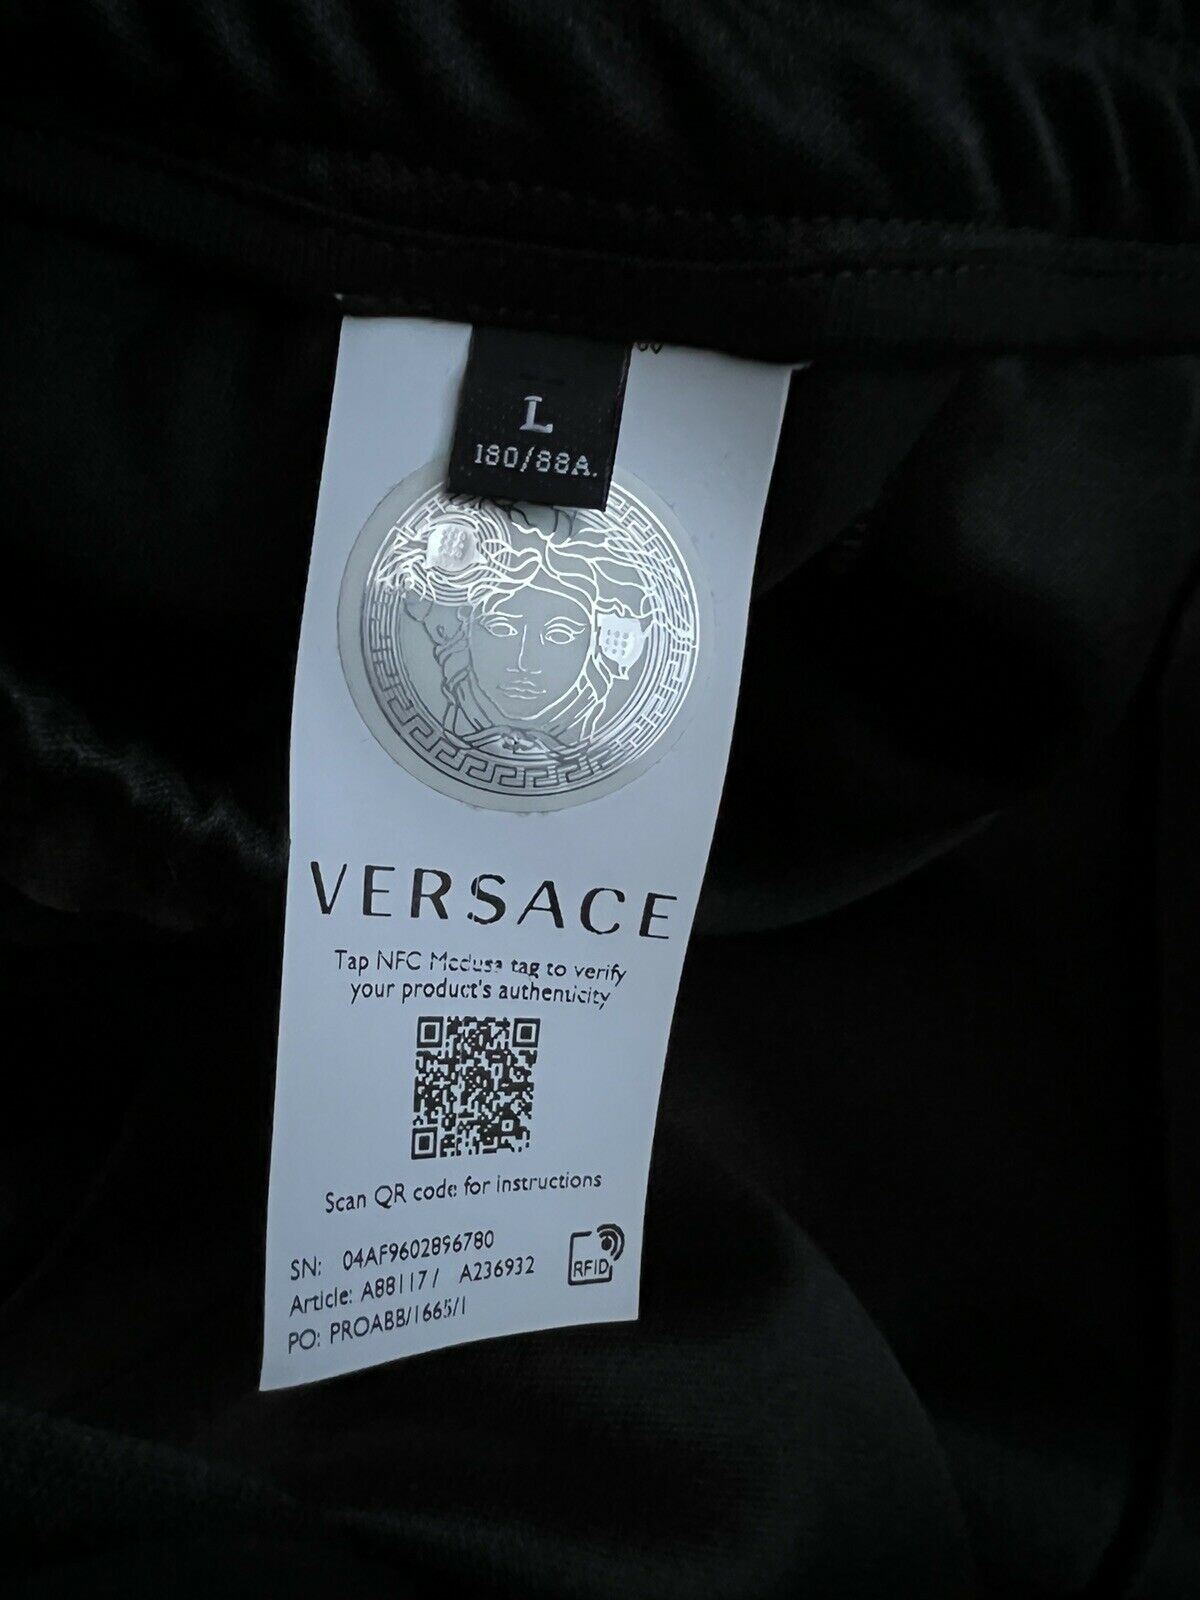 NWT $875 Versace Men's Black Tailor Fit Activewear Pants L Made in Italy A88117